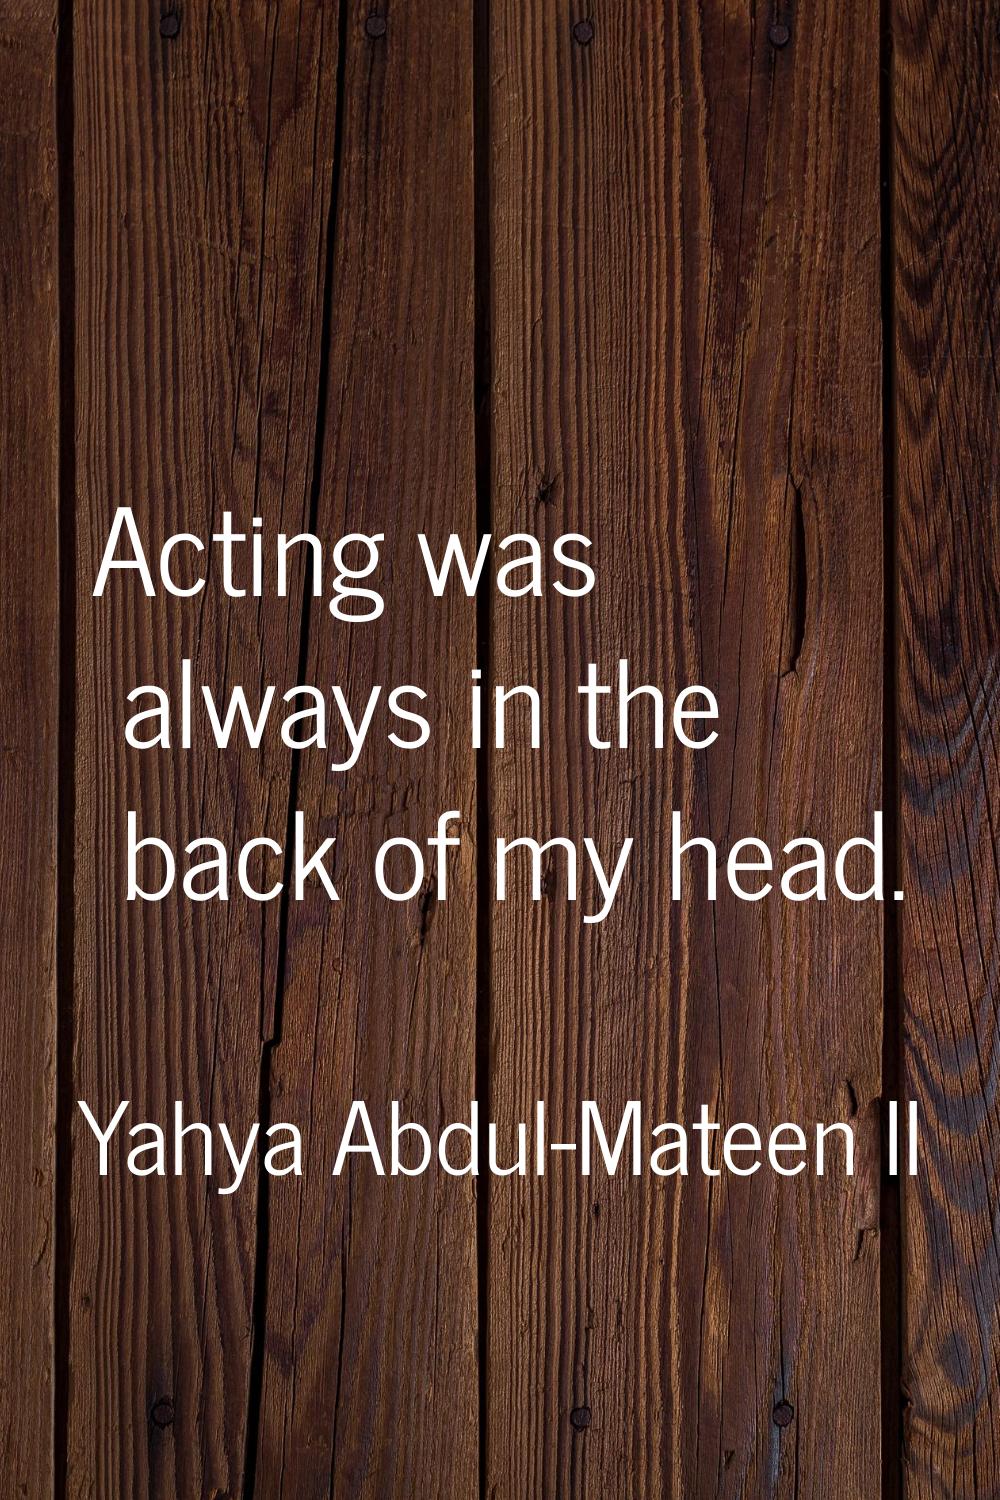 Acting was always in the back of my head.